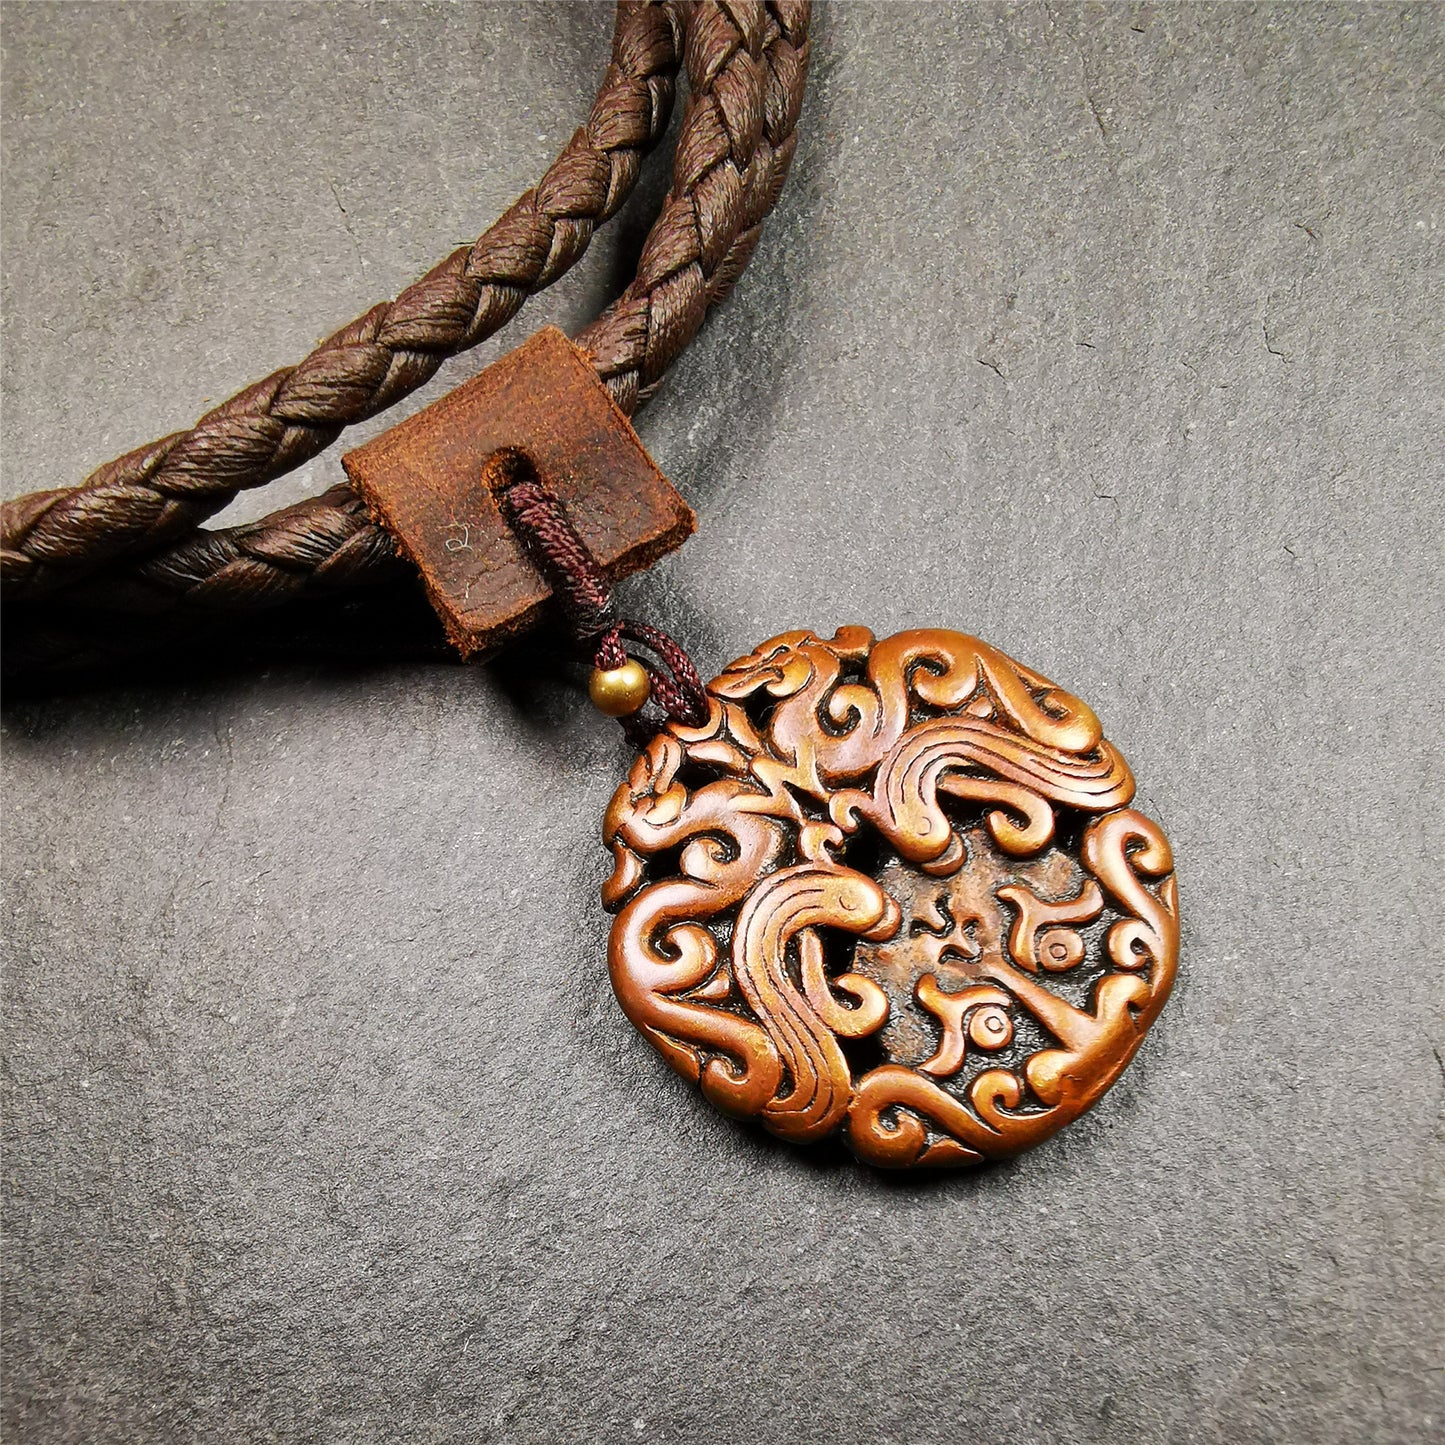 This Kirtimukha amulet was collected from Tibet, it is carved with a Kirtimukha totem,made of different materials,size is about 1.1 inch, very delicate. You can make it into a necklace, or a keychain, or just put it in your shrine.